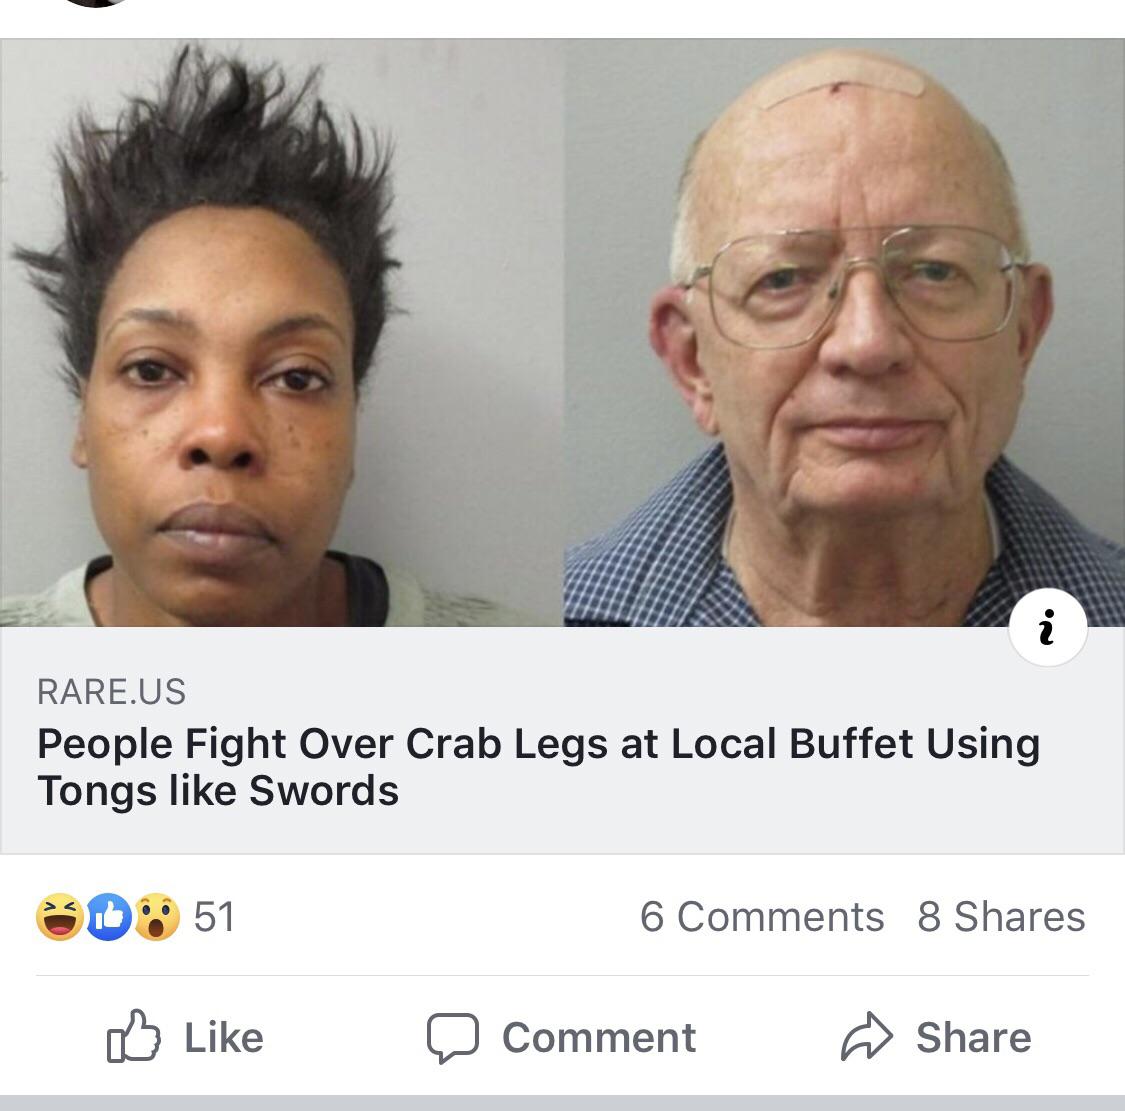 alabama crab leg fight - Rare.Us People Fight Over Crab Legs at Local Buffet Using Tongs Swords D 51 6 8 Comment @